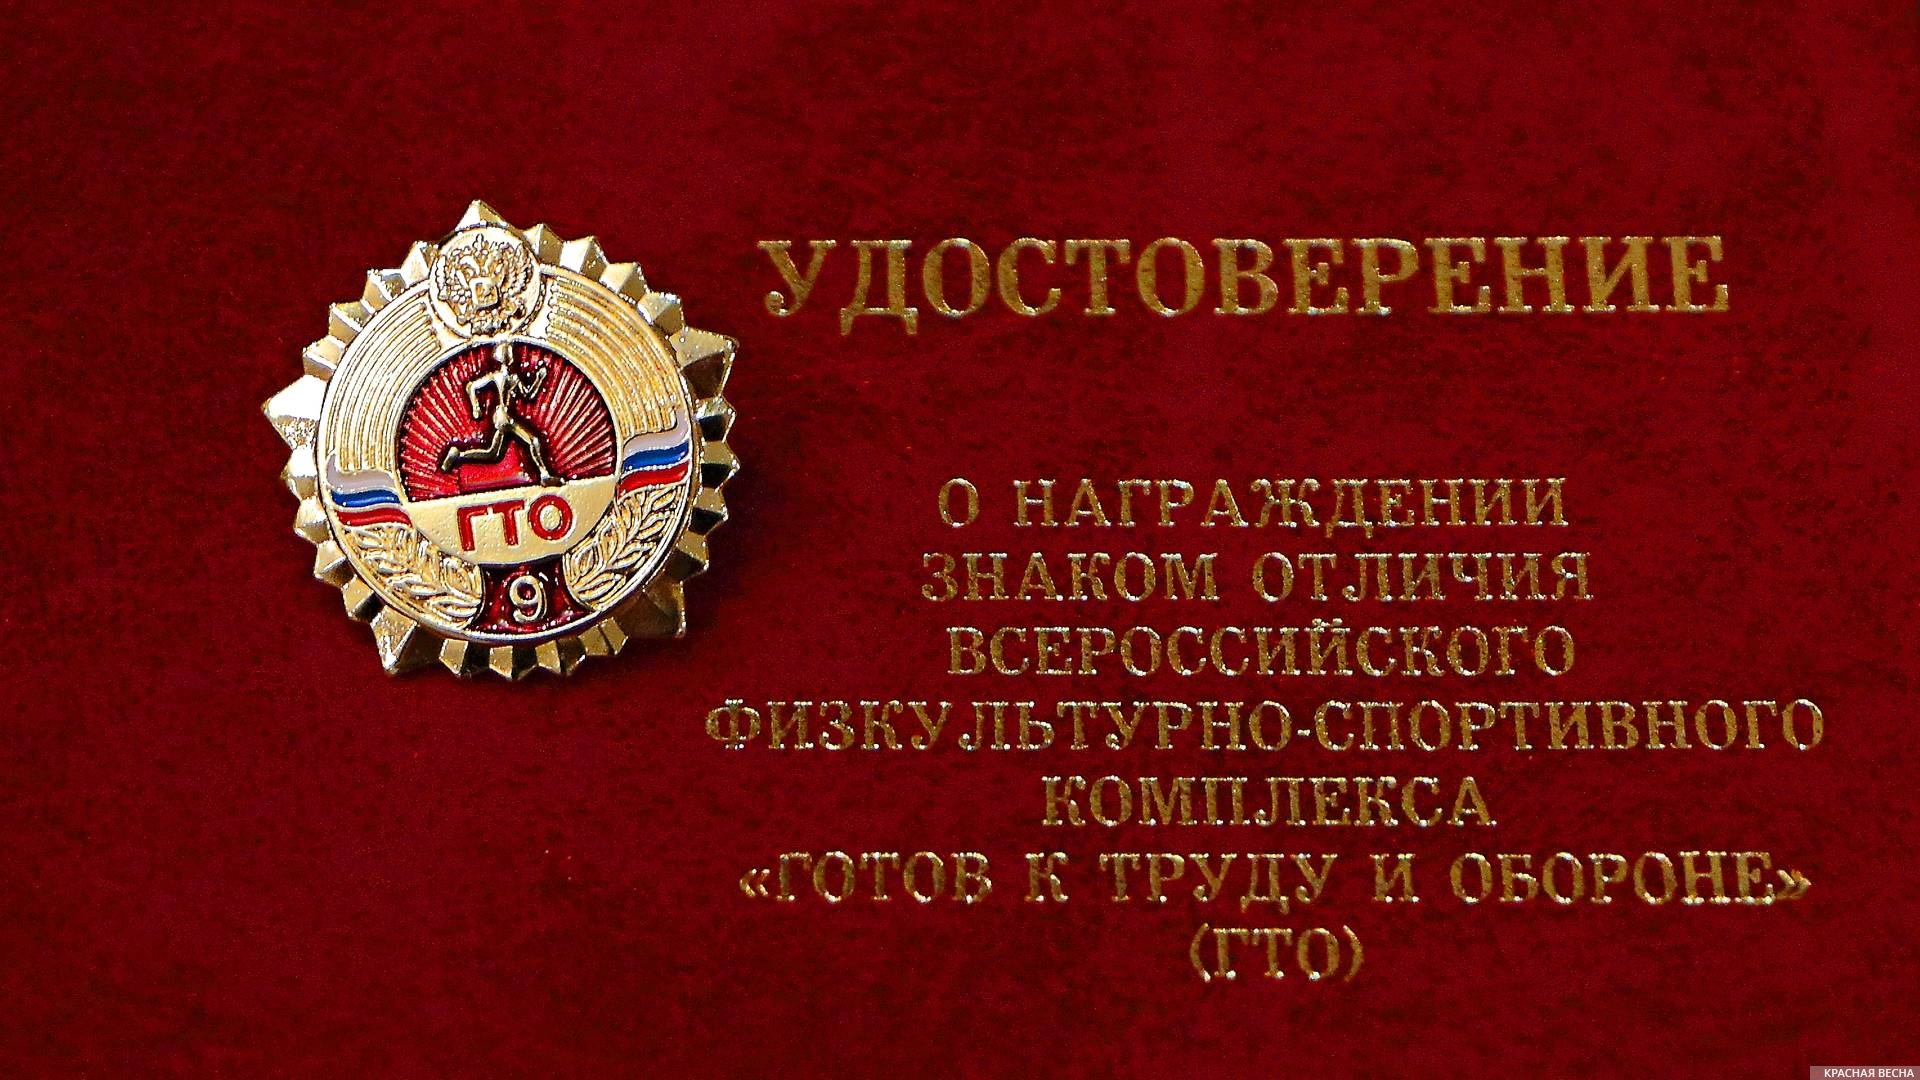 The badge and the ID card of the Ready for Labor and Defense